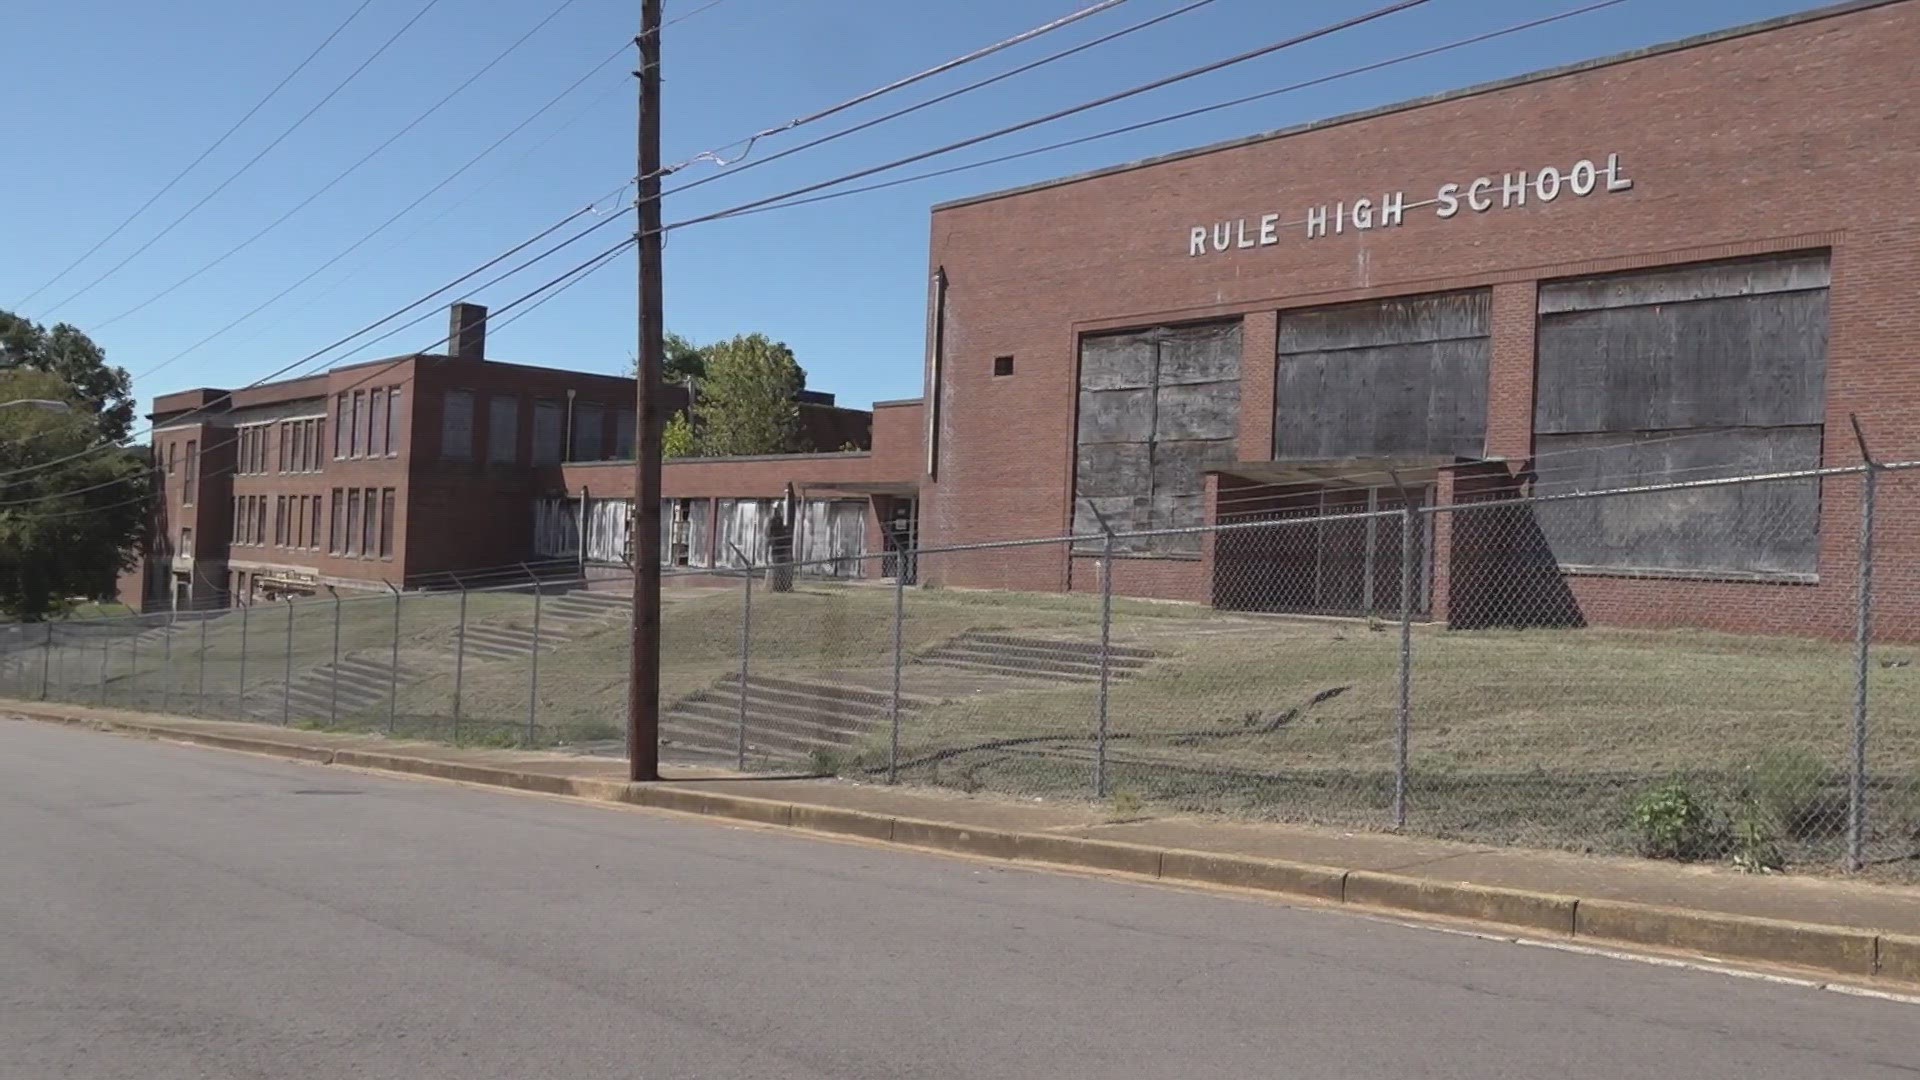 Crews are tearing down a school building that holds around 60 years of memories in Knoxville.